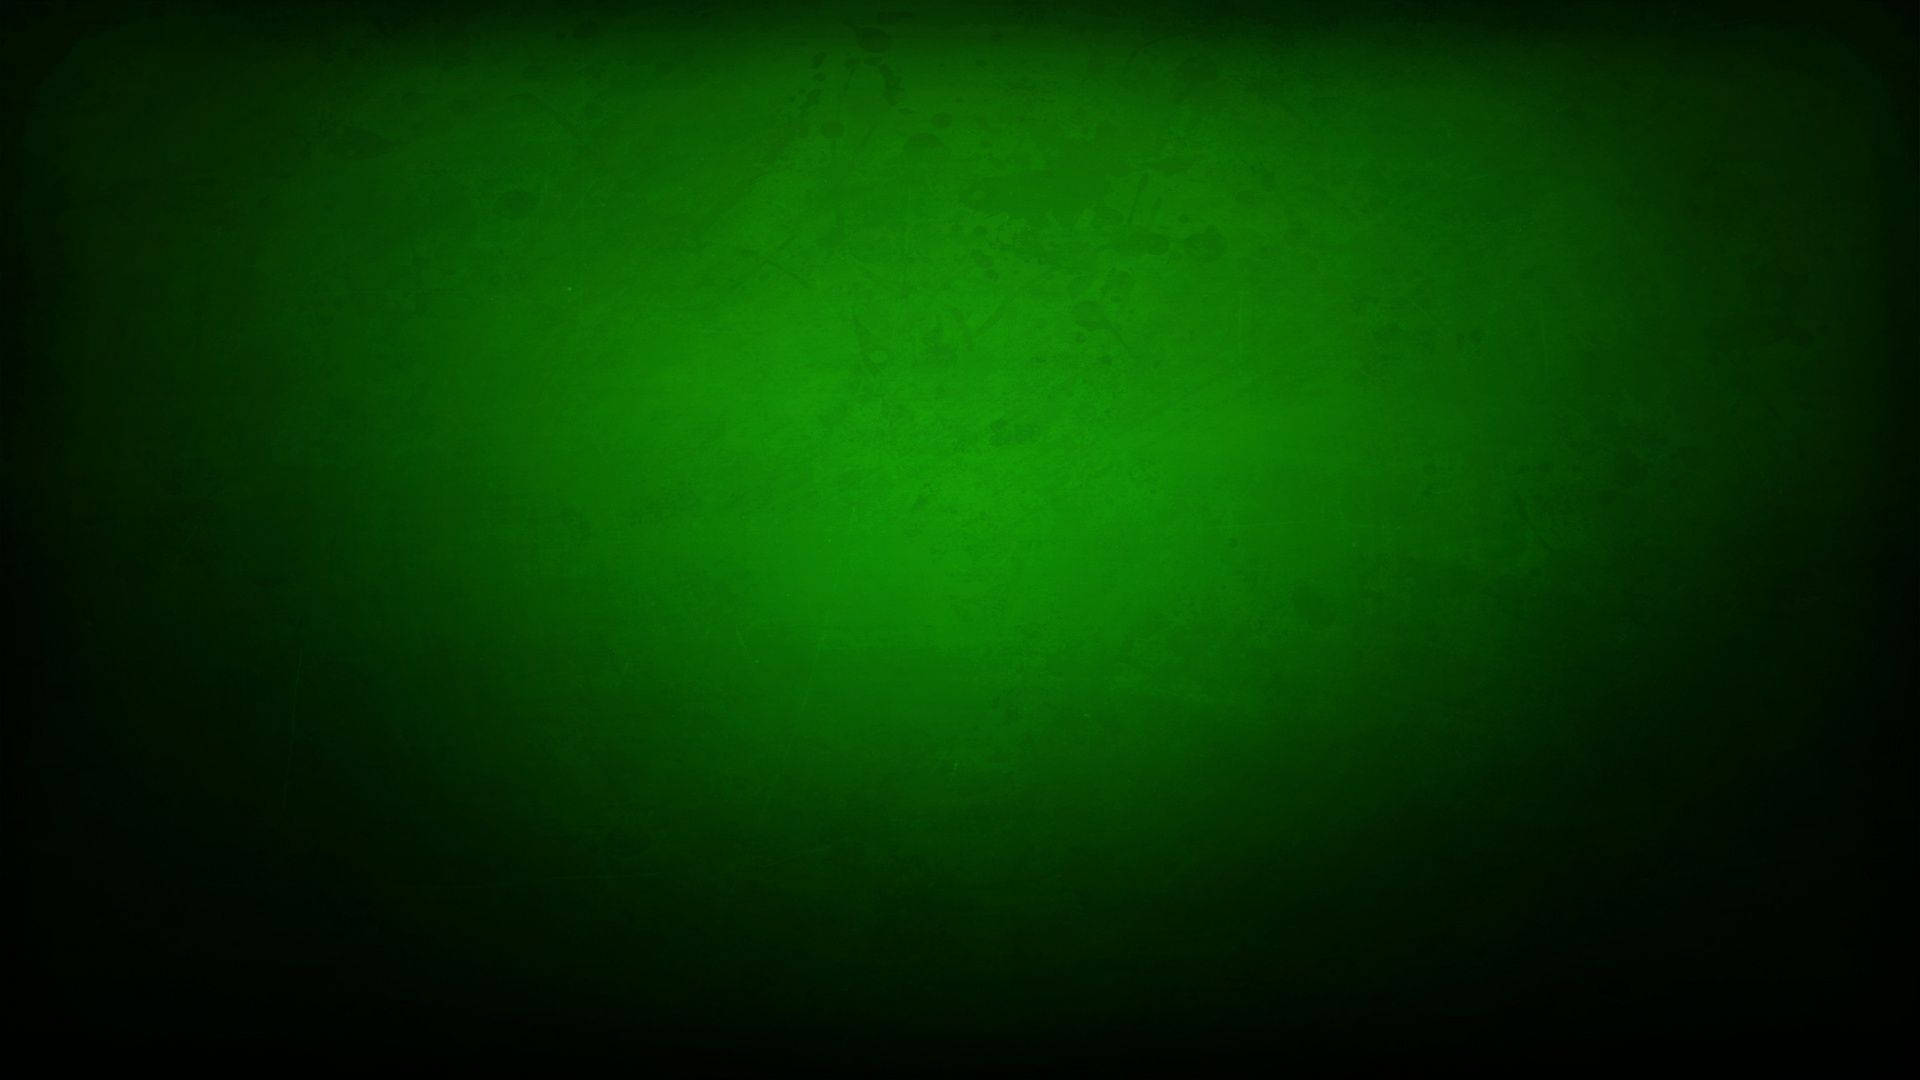 Look and marvel at this beautiful natural gradient of green! Wallpaper